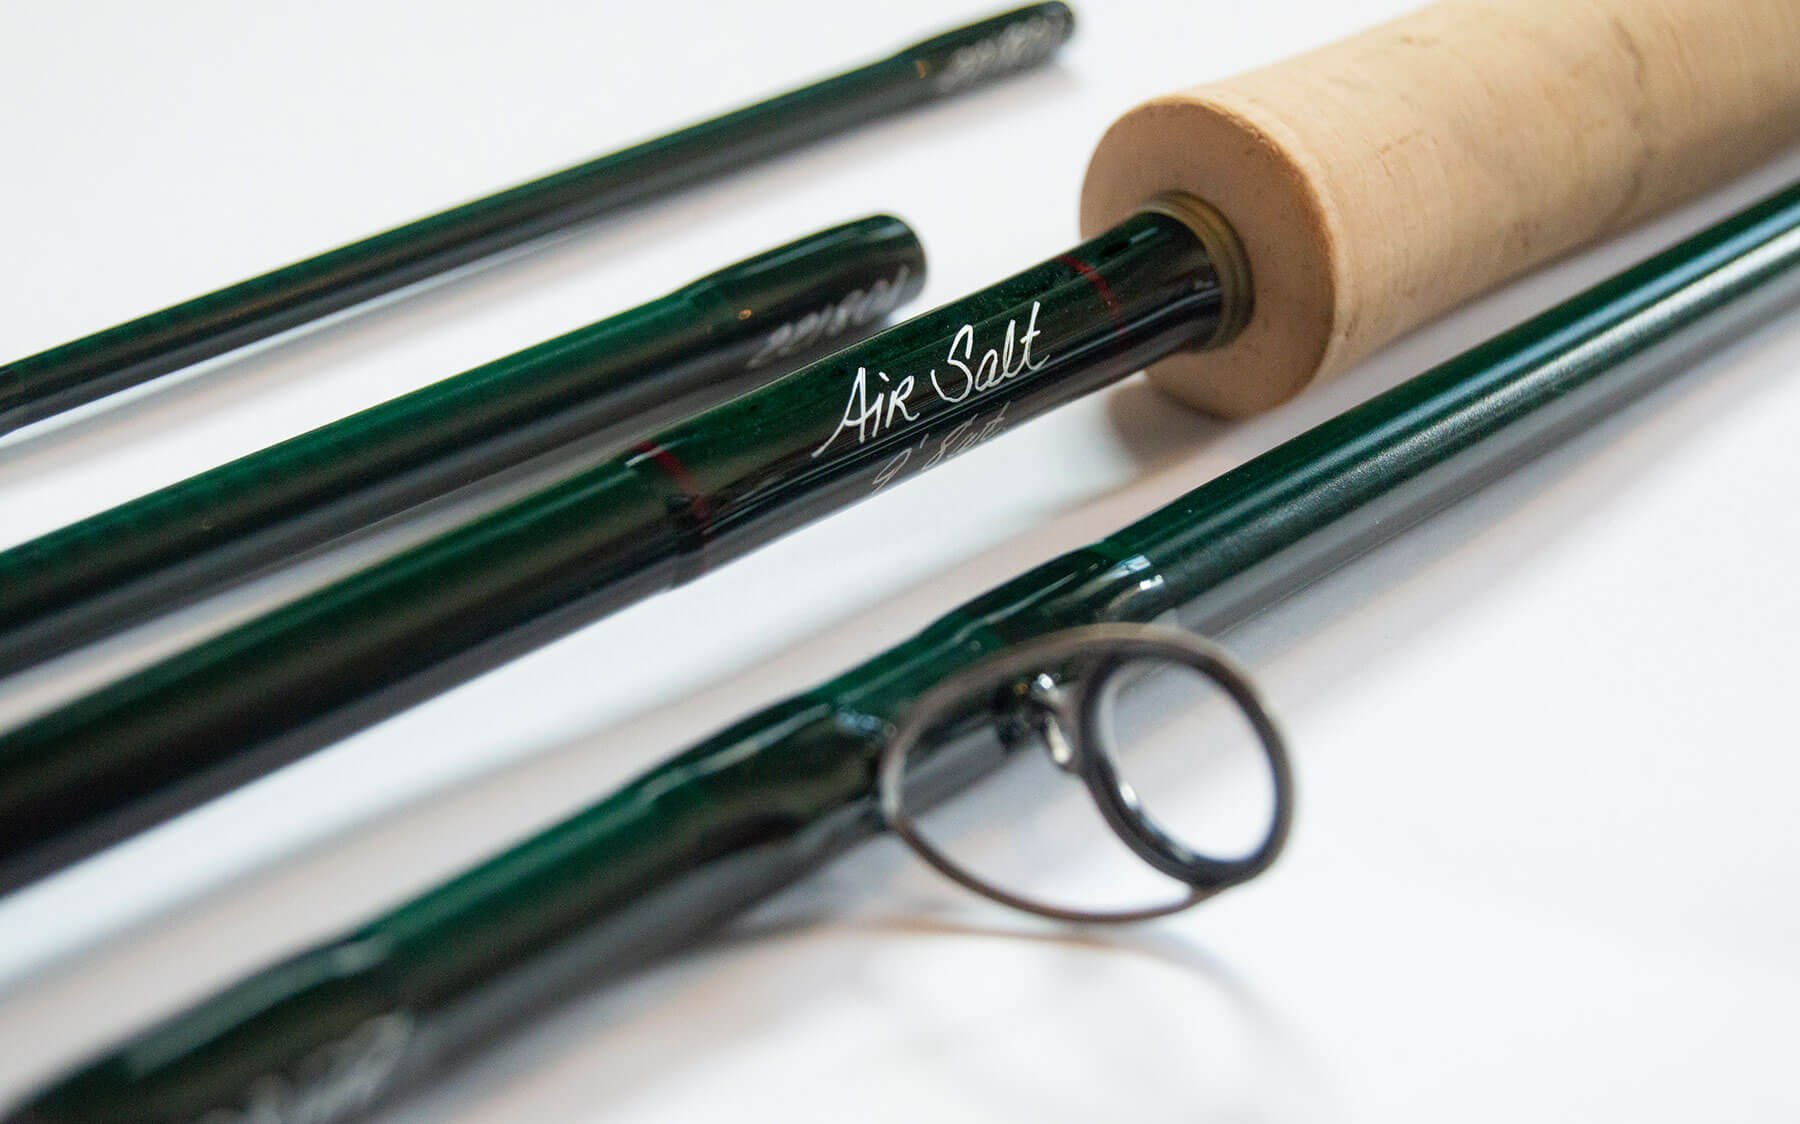 Winston Saltwater Air 9' 10-weight fly rod